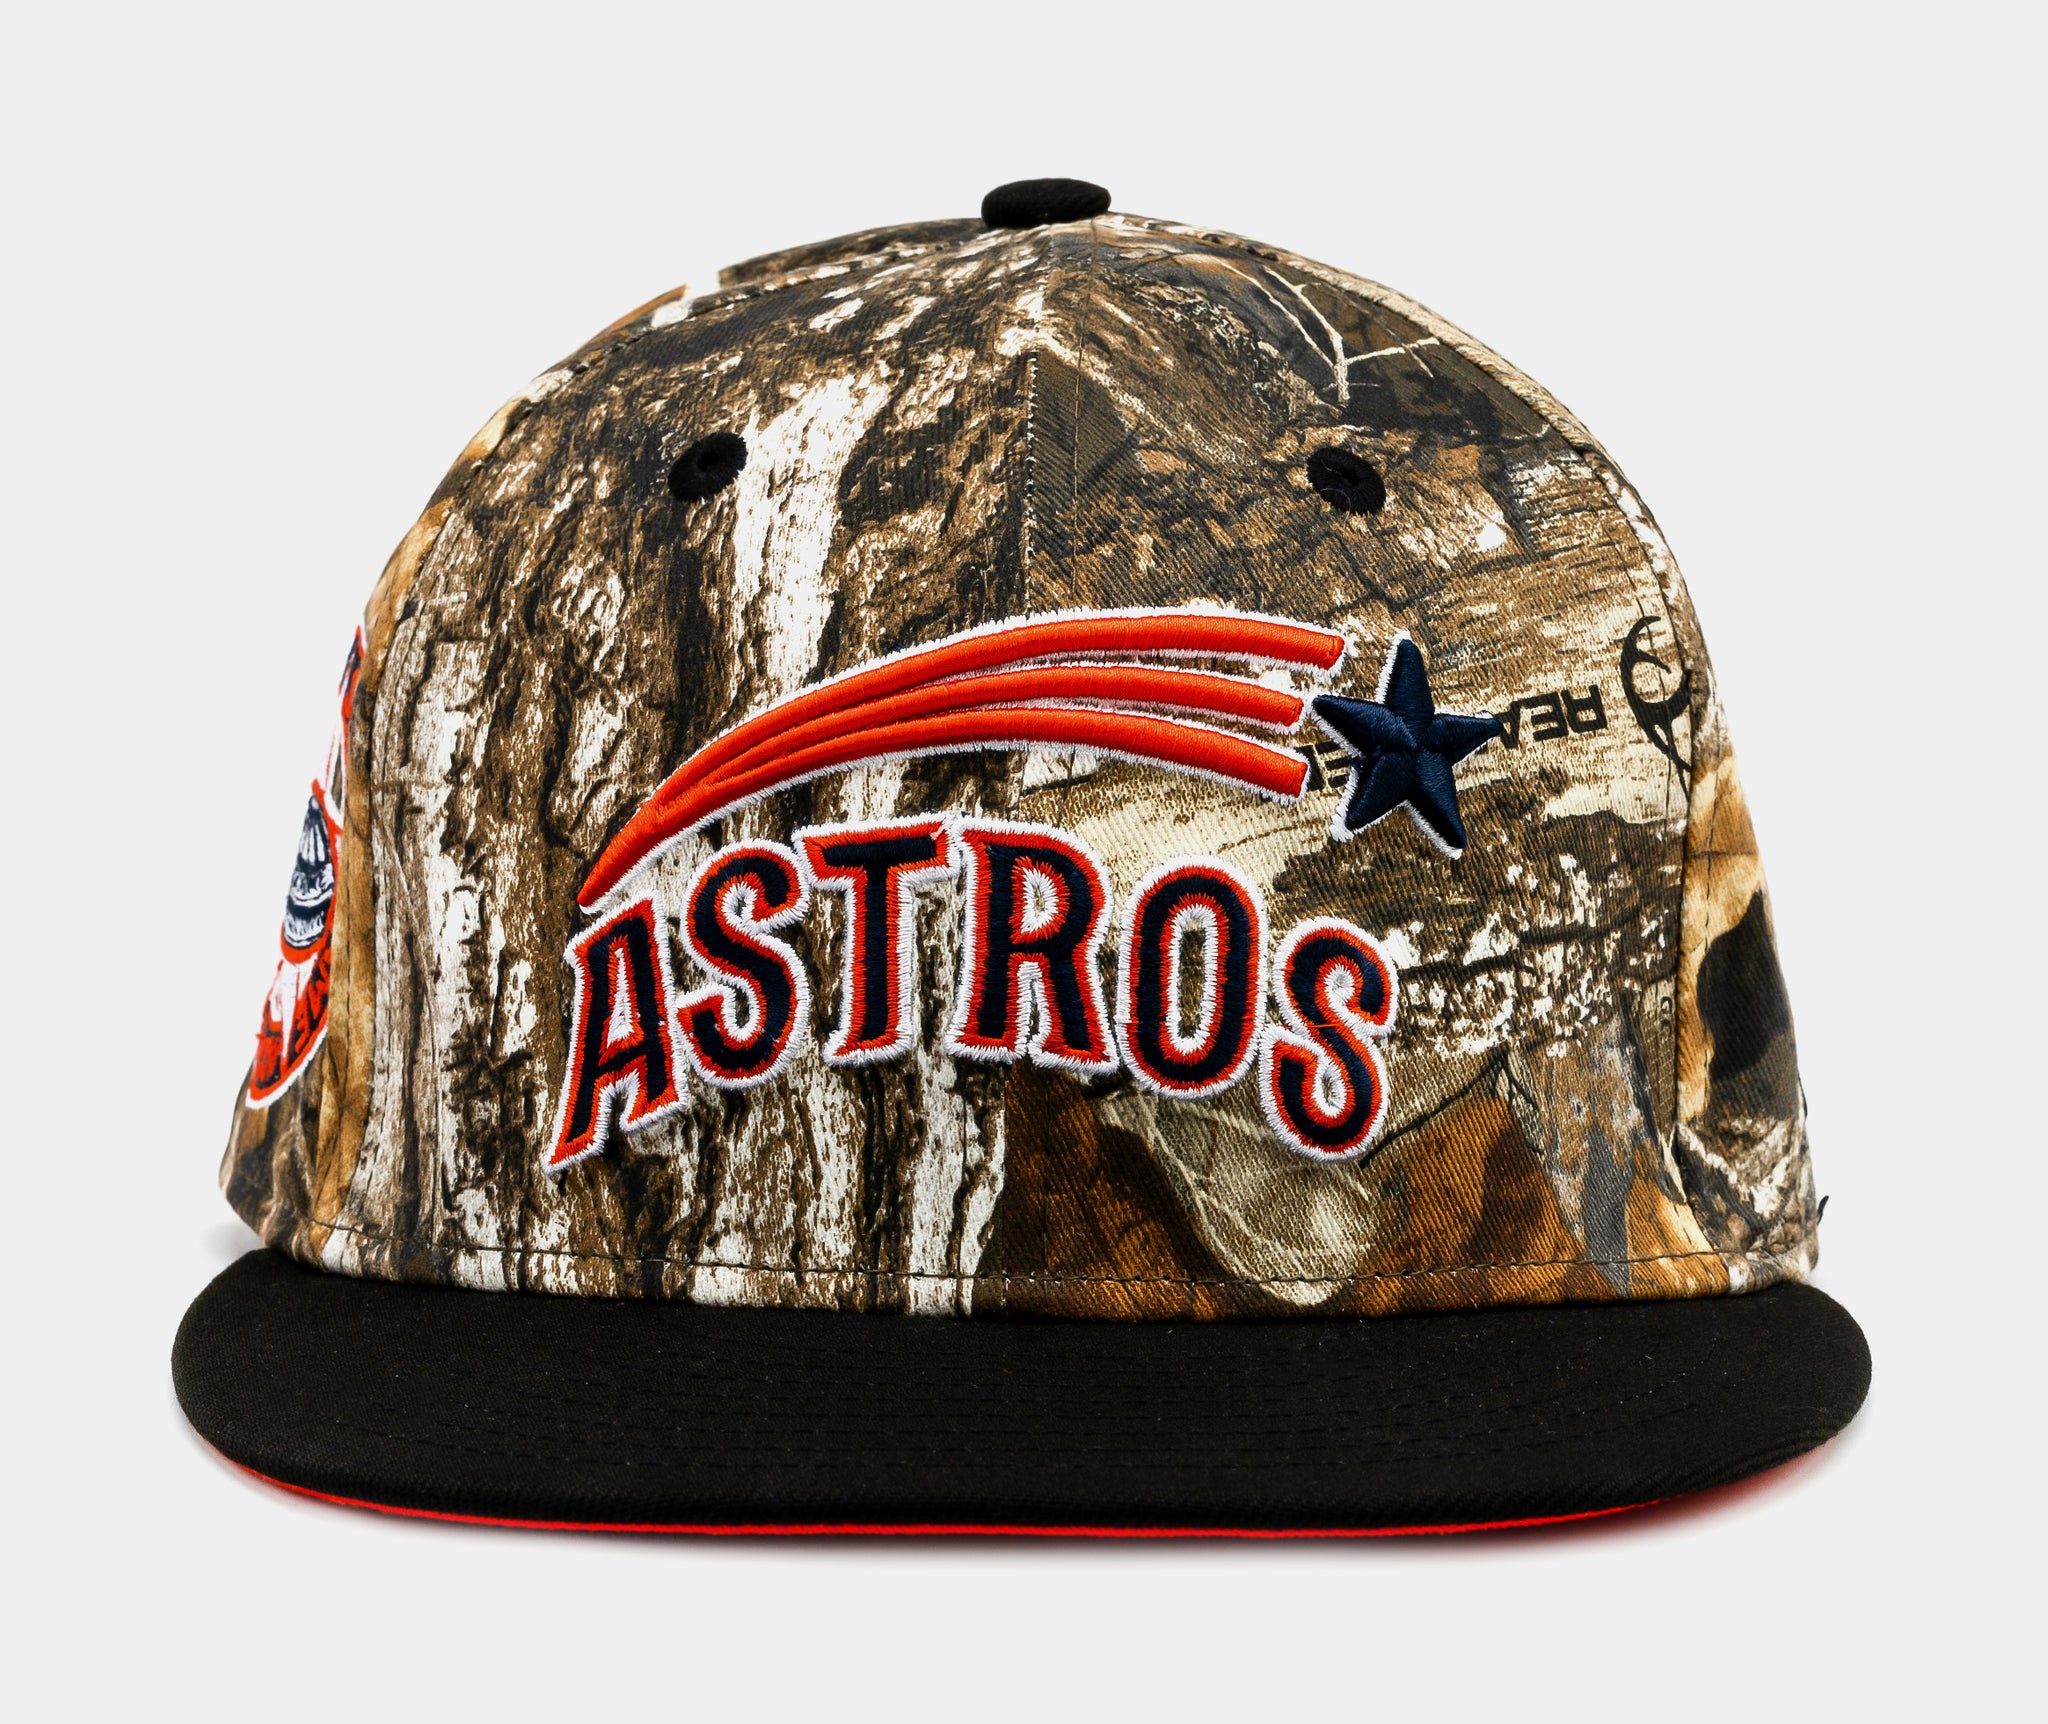 Men's New Era Camo Houston Astros Autumn 59FIFTY Fitted Hat